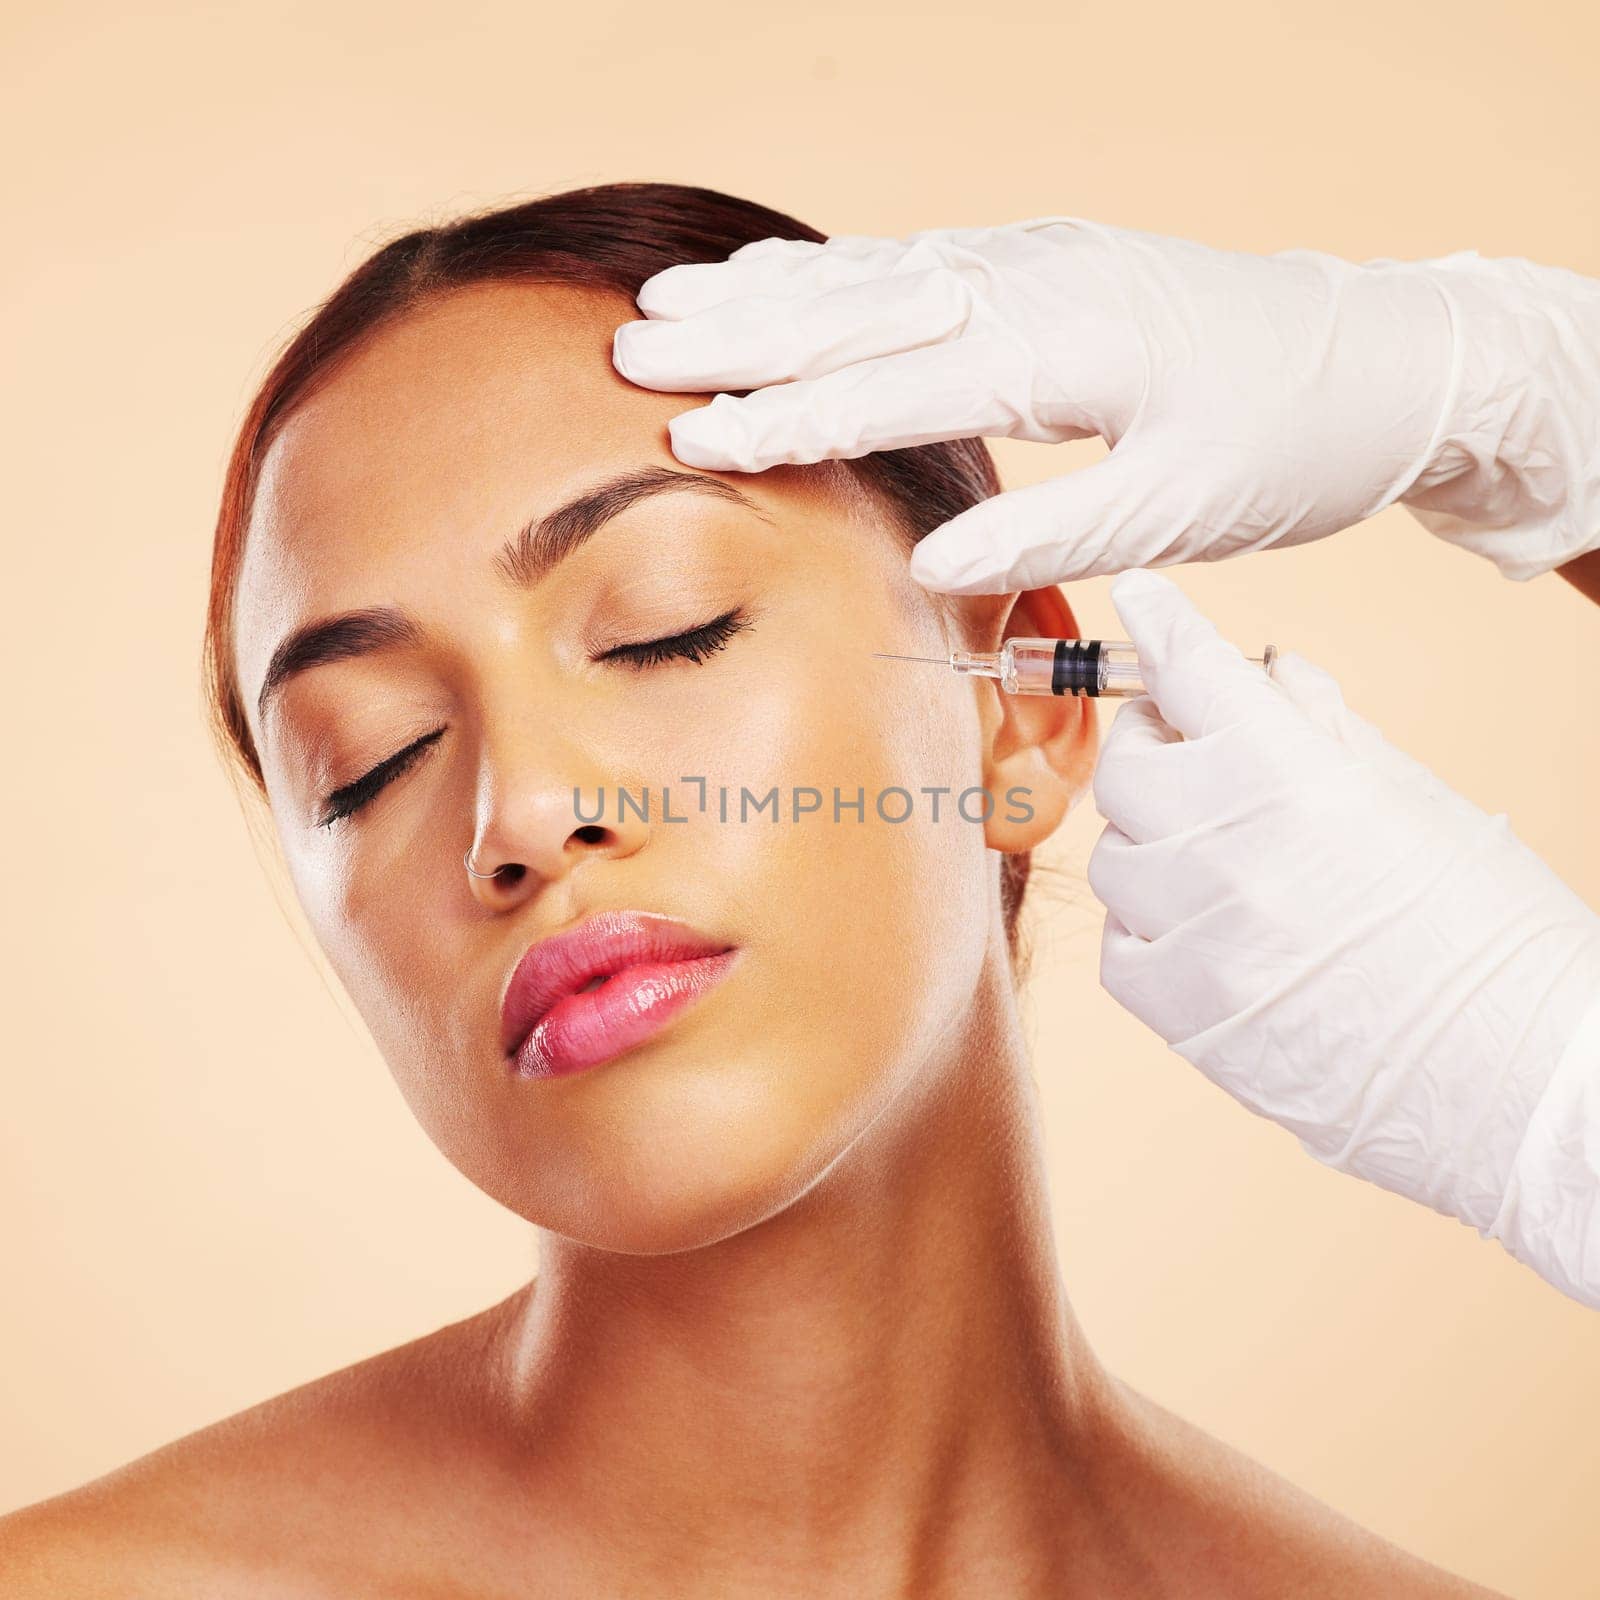 Hands, woman or plastic surgery with needle for facelift or cosmetics isolated on studio background. Cheek, anti aging or girl model with injection, dermatology and beauty glow in medical procedure.